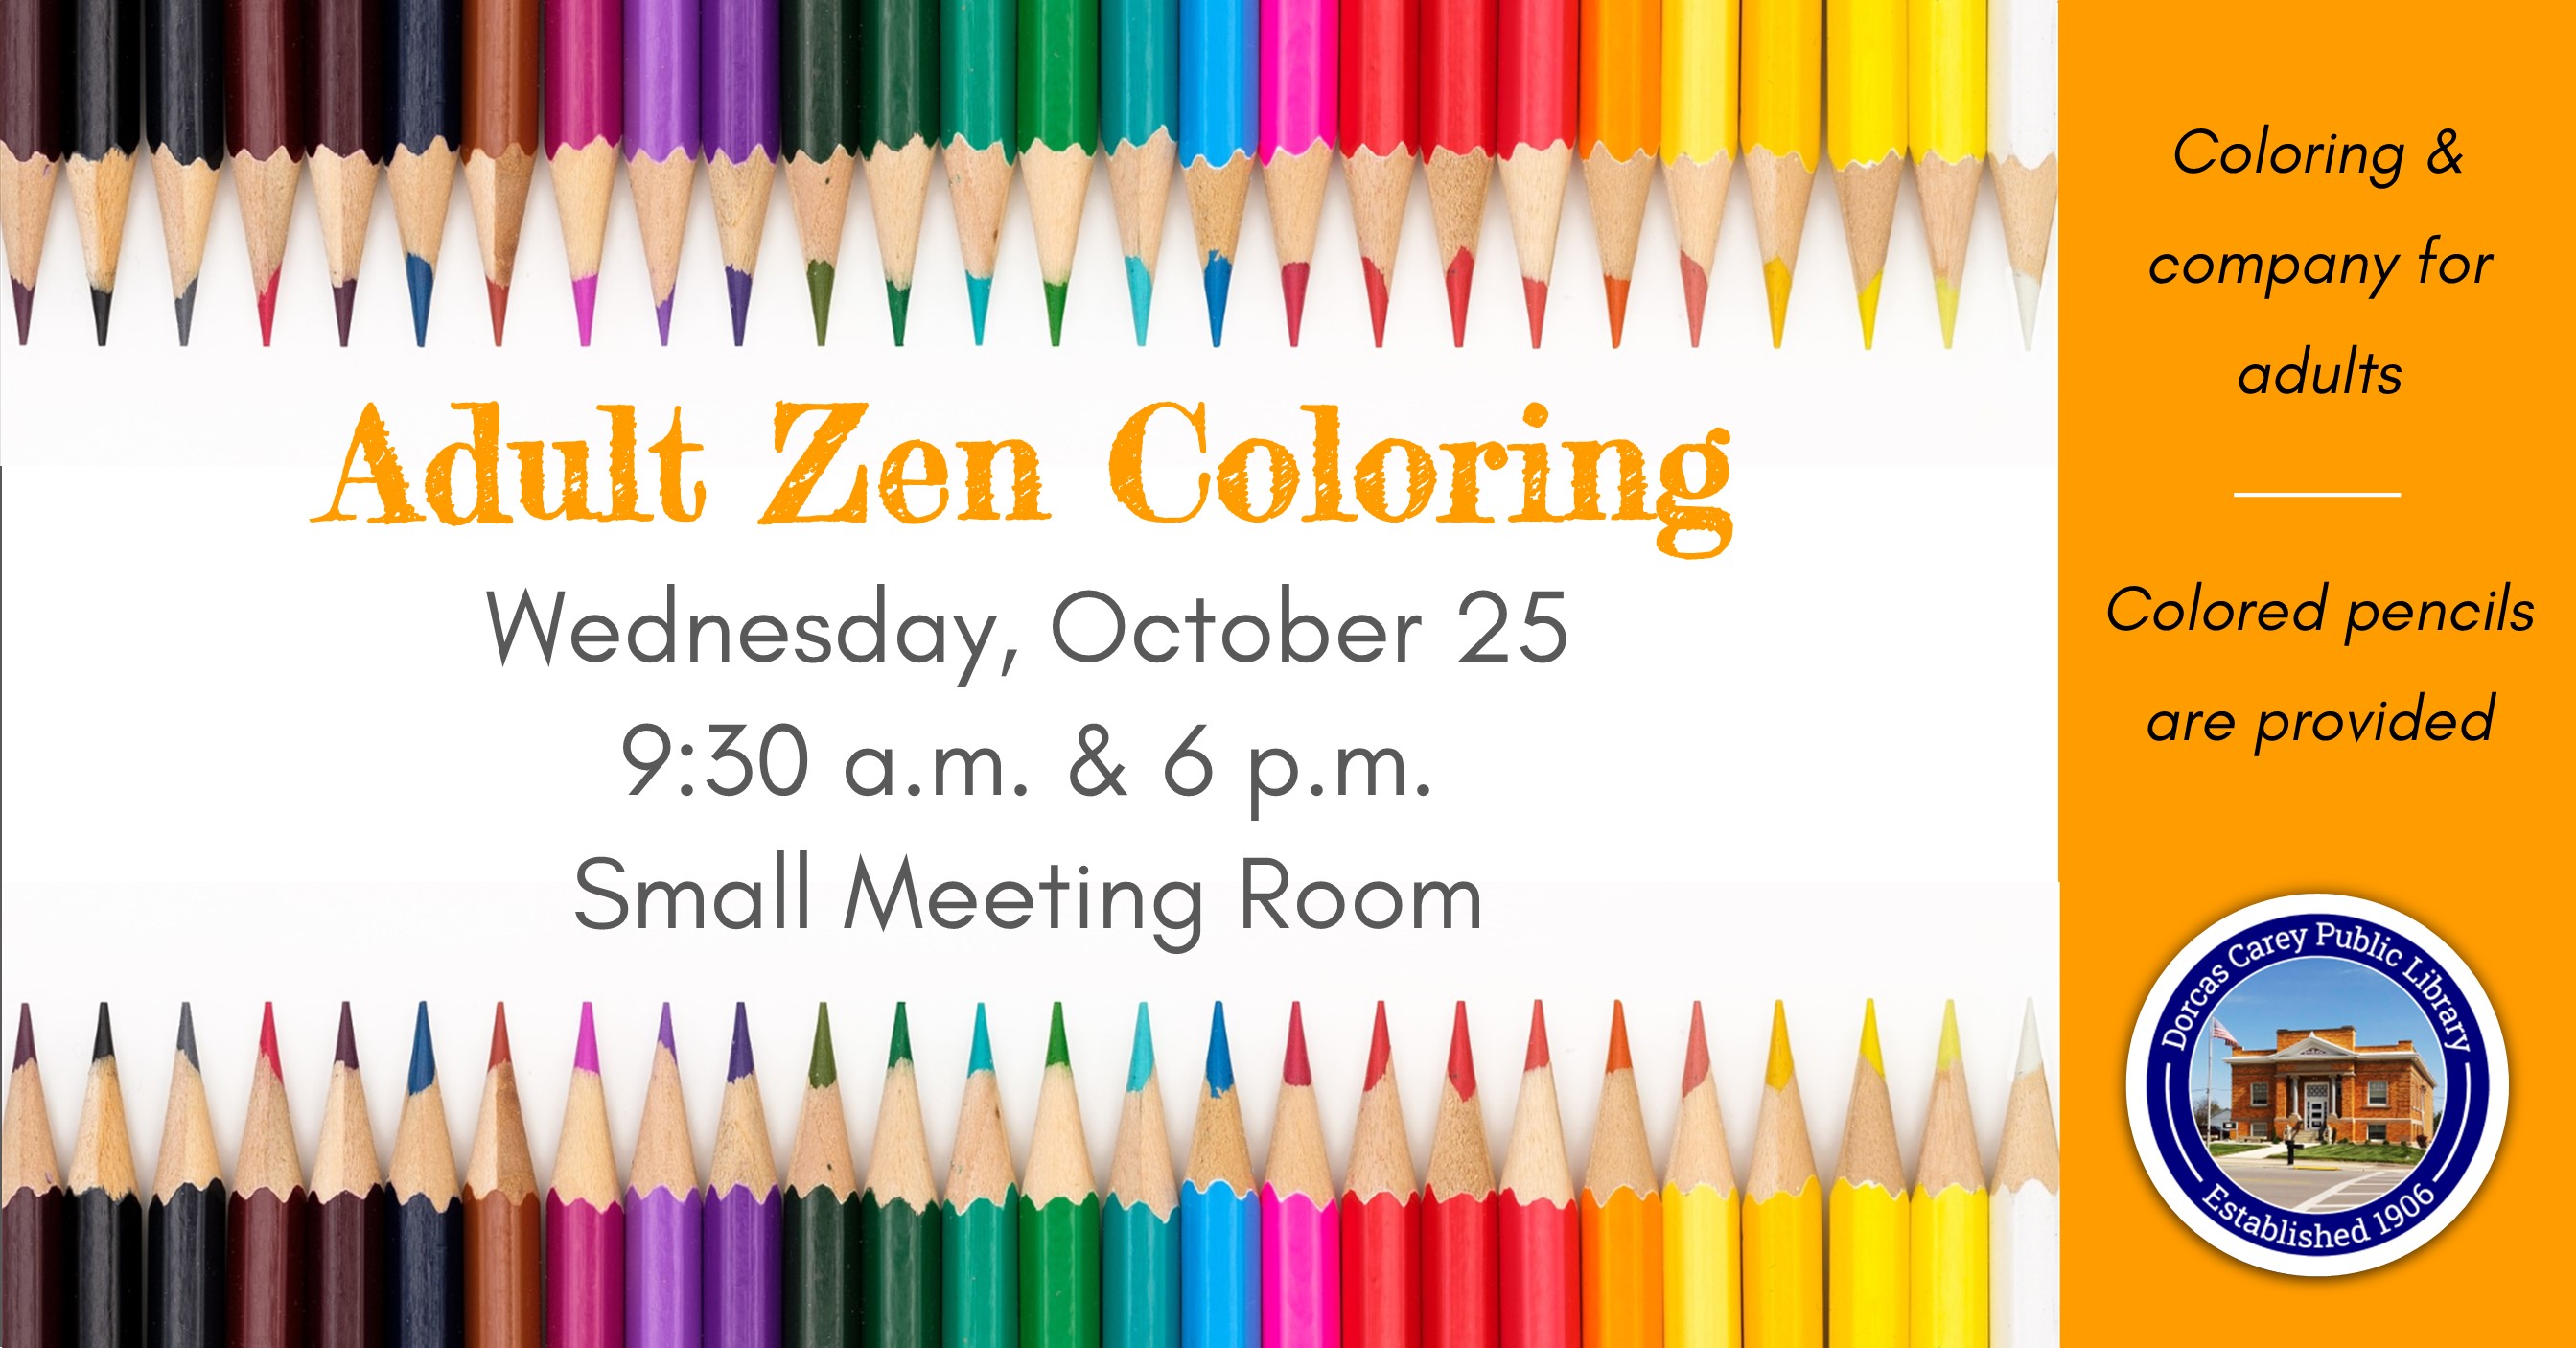 Zen adult coloring is held on the fourth Wednesday of the month at 9:30 a.m. and 6 p.m.  Relax and unwind with a new coloring project every month and a sweet snack.